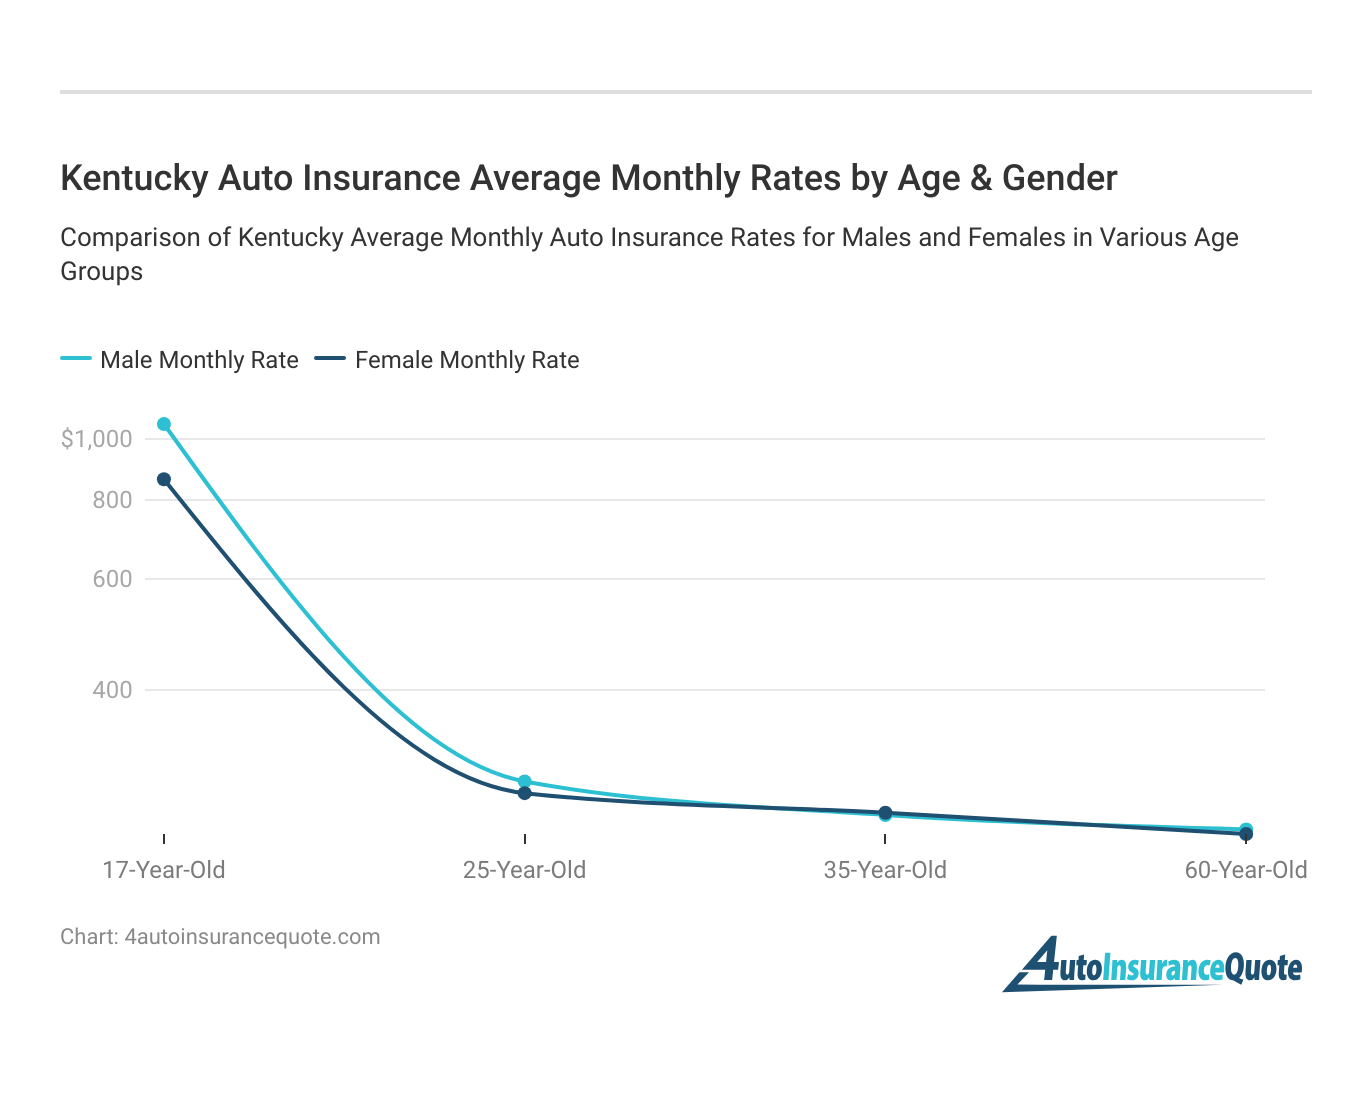 <h3>Kentucky Auto Insurance Average Monthly Rates by Age & Gender</h3>